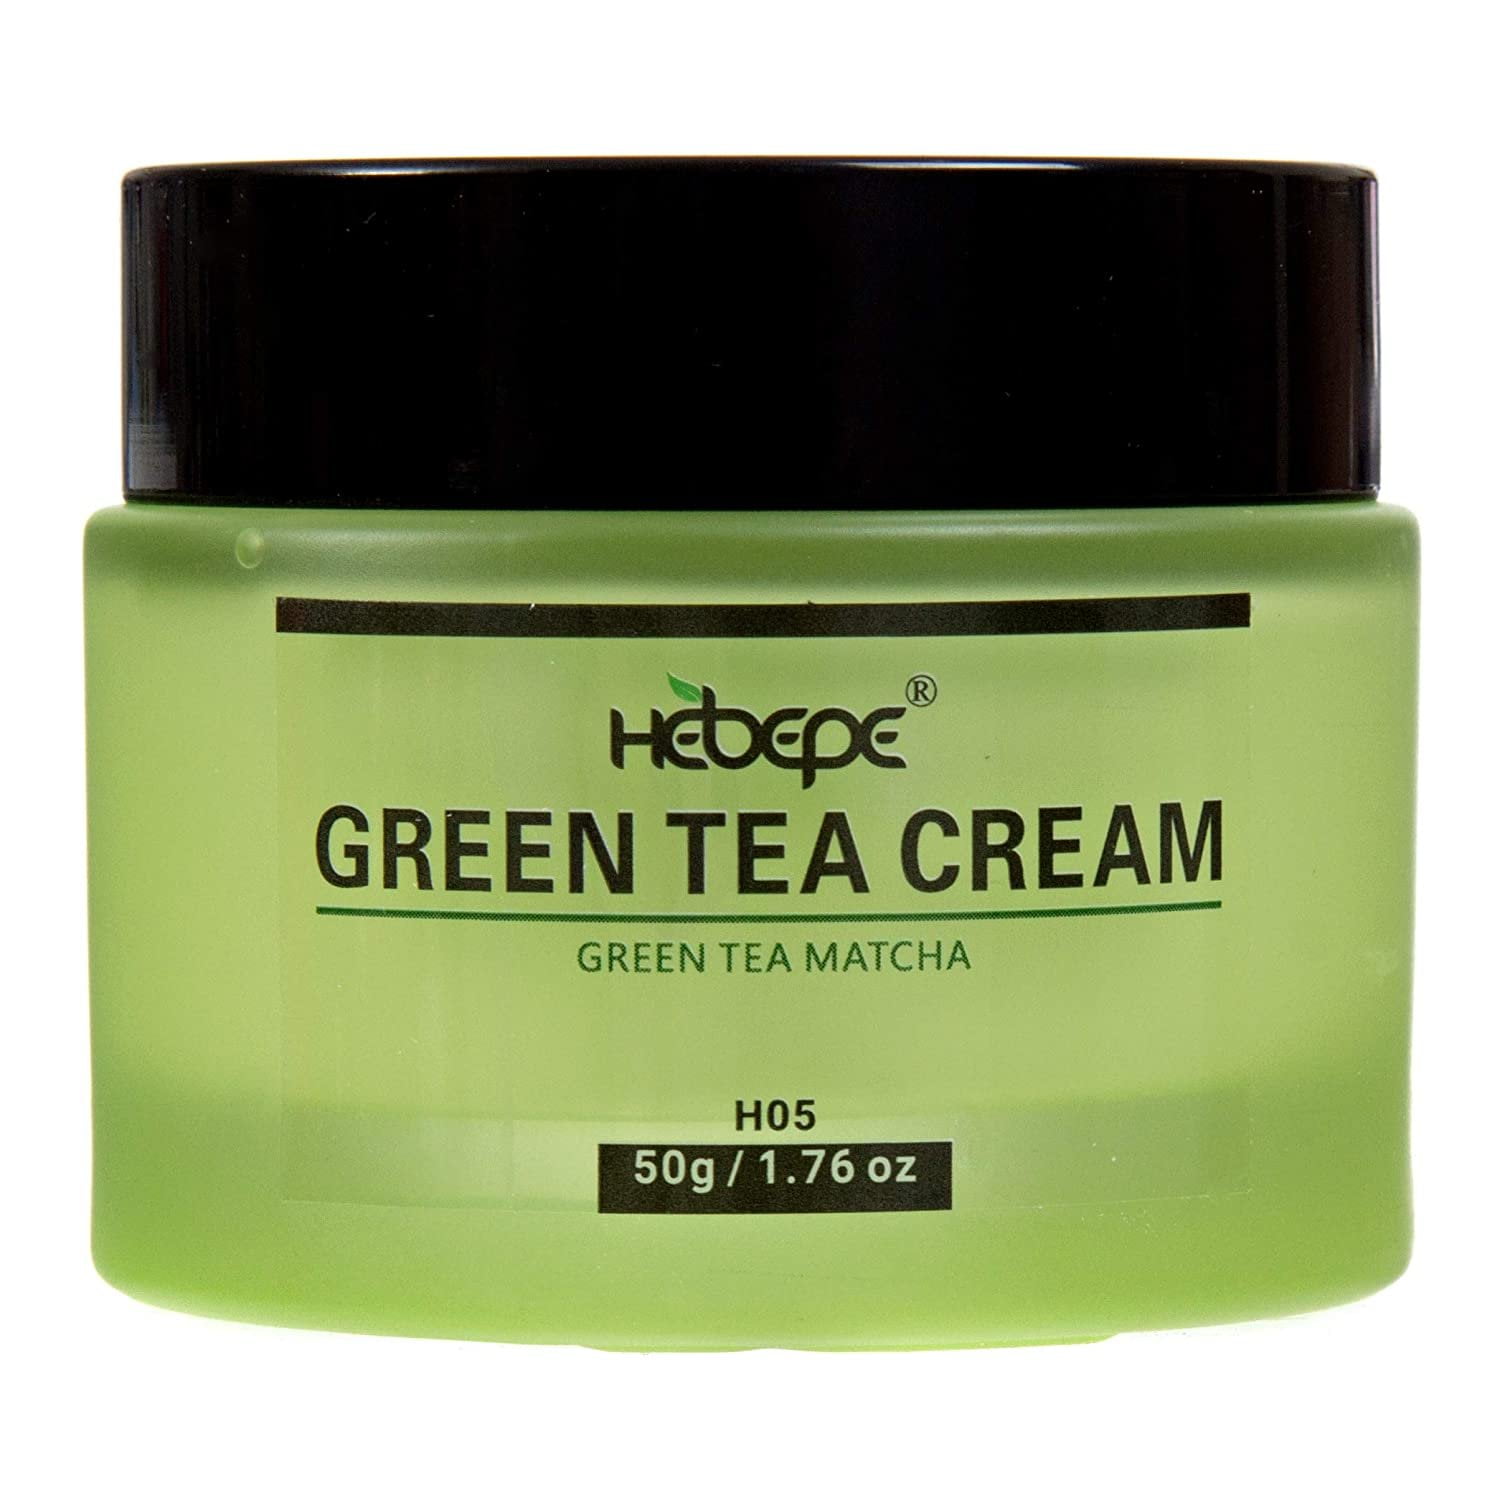 Ernæring grinende rådgive Hebepe Green Tea Matcha Face Moisturizer Cream for Dry Skin with Collagen,  Cocoa Butter, Grapefruit, Vitamin C&E, Tangerine Peel Extract, Anti Aging  Face Cream Reduce Appearance of Wrinkles&Fine Lines - Walmart.com